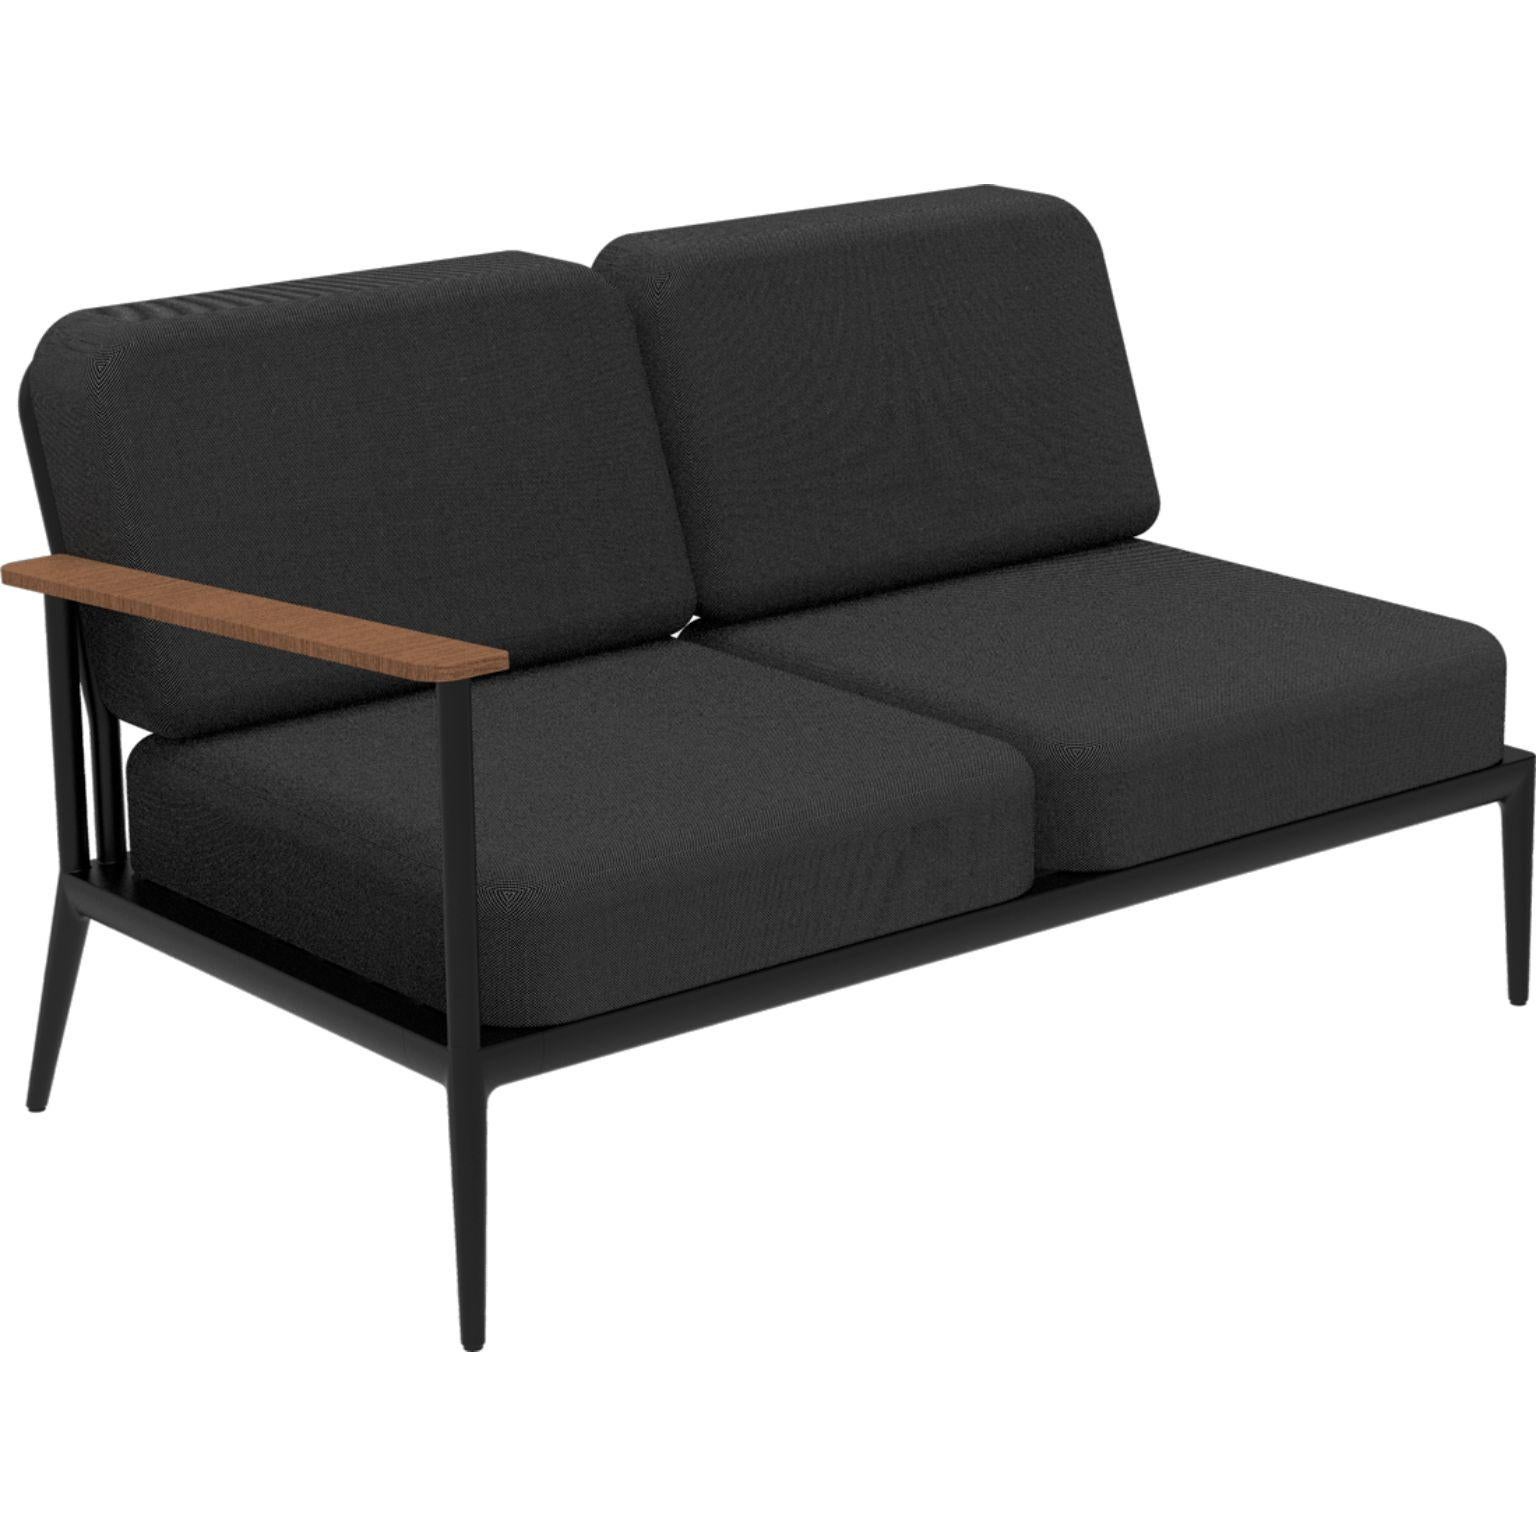 Nature Black Double Right modular sofa by MOWEE
Dimensions: D85 x W144 x H81 cm (seat height 42 cm).
Material: Aluminum, upholstery and Iroko Wood.
Weight: 29 kg.
Also available in different colors and finishes. 

An unmistakable collection